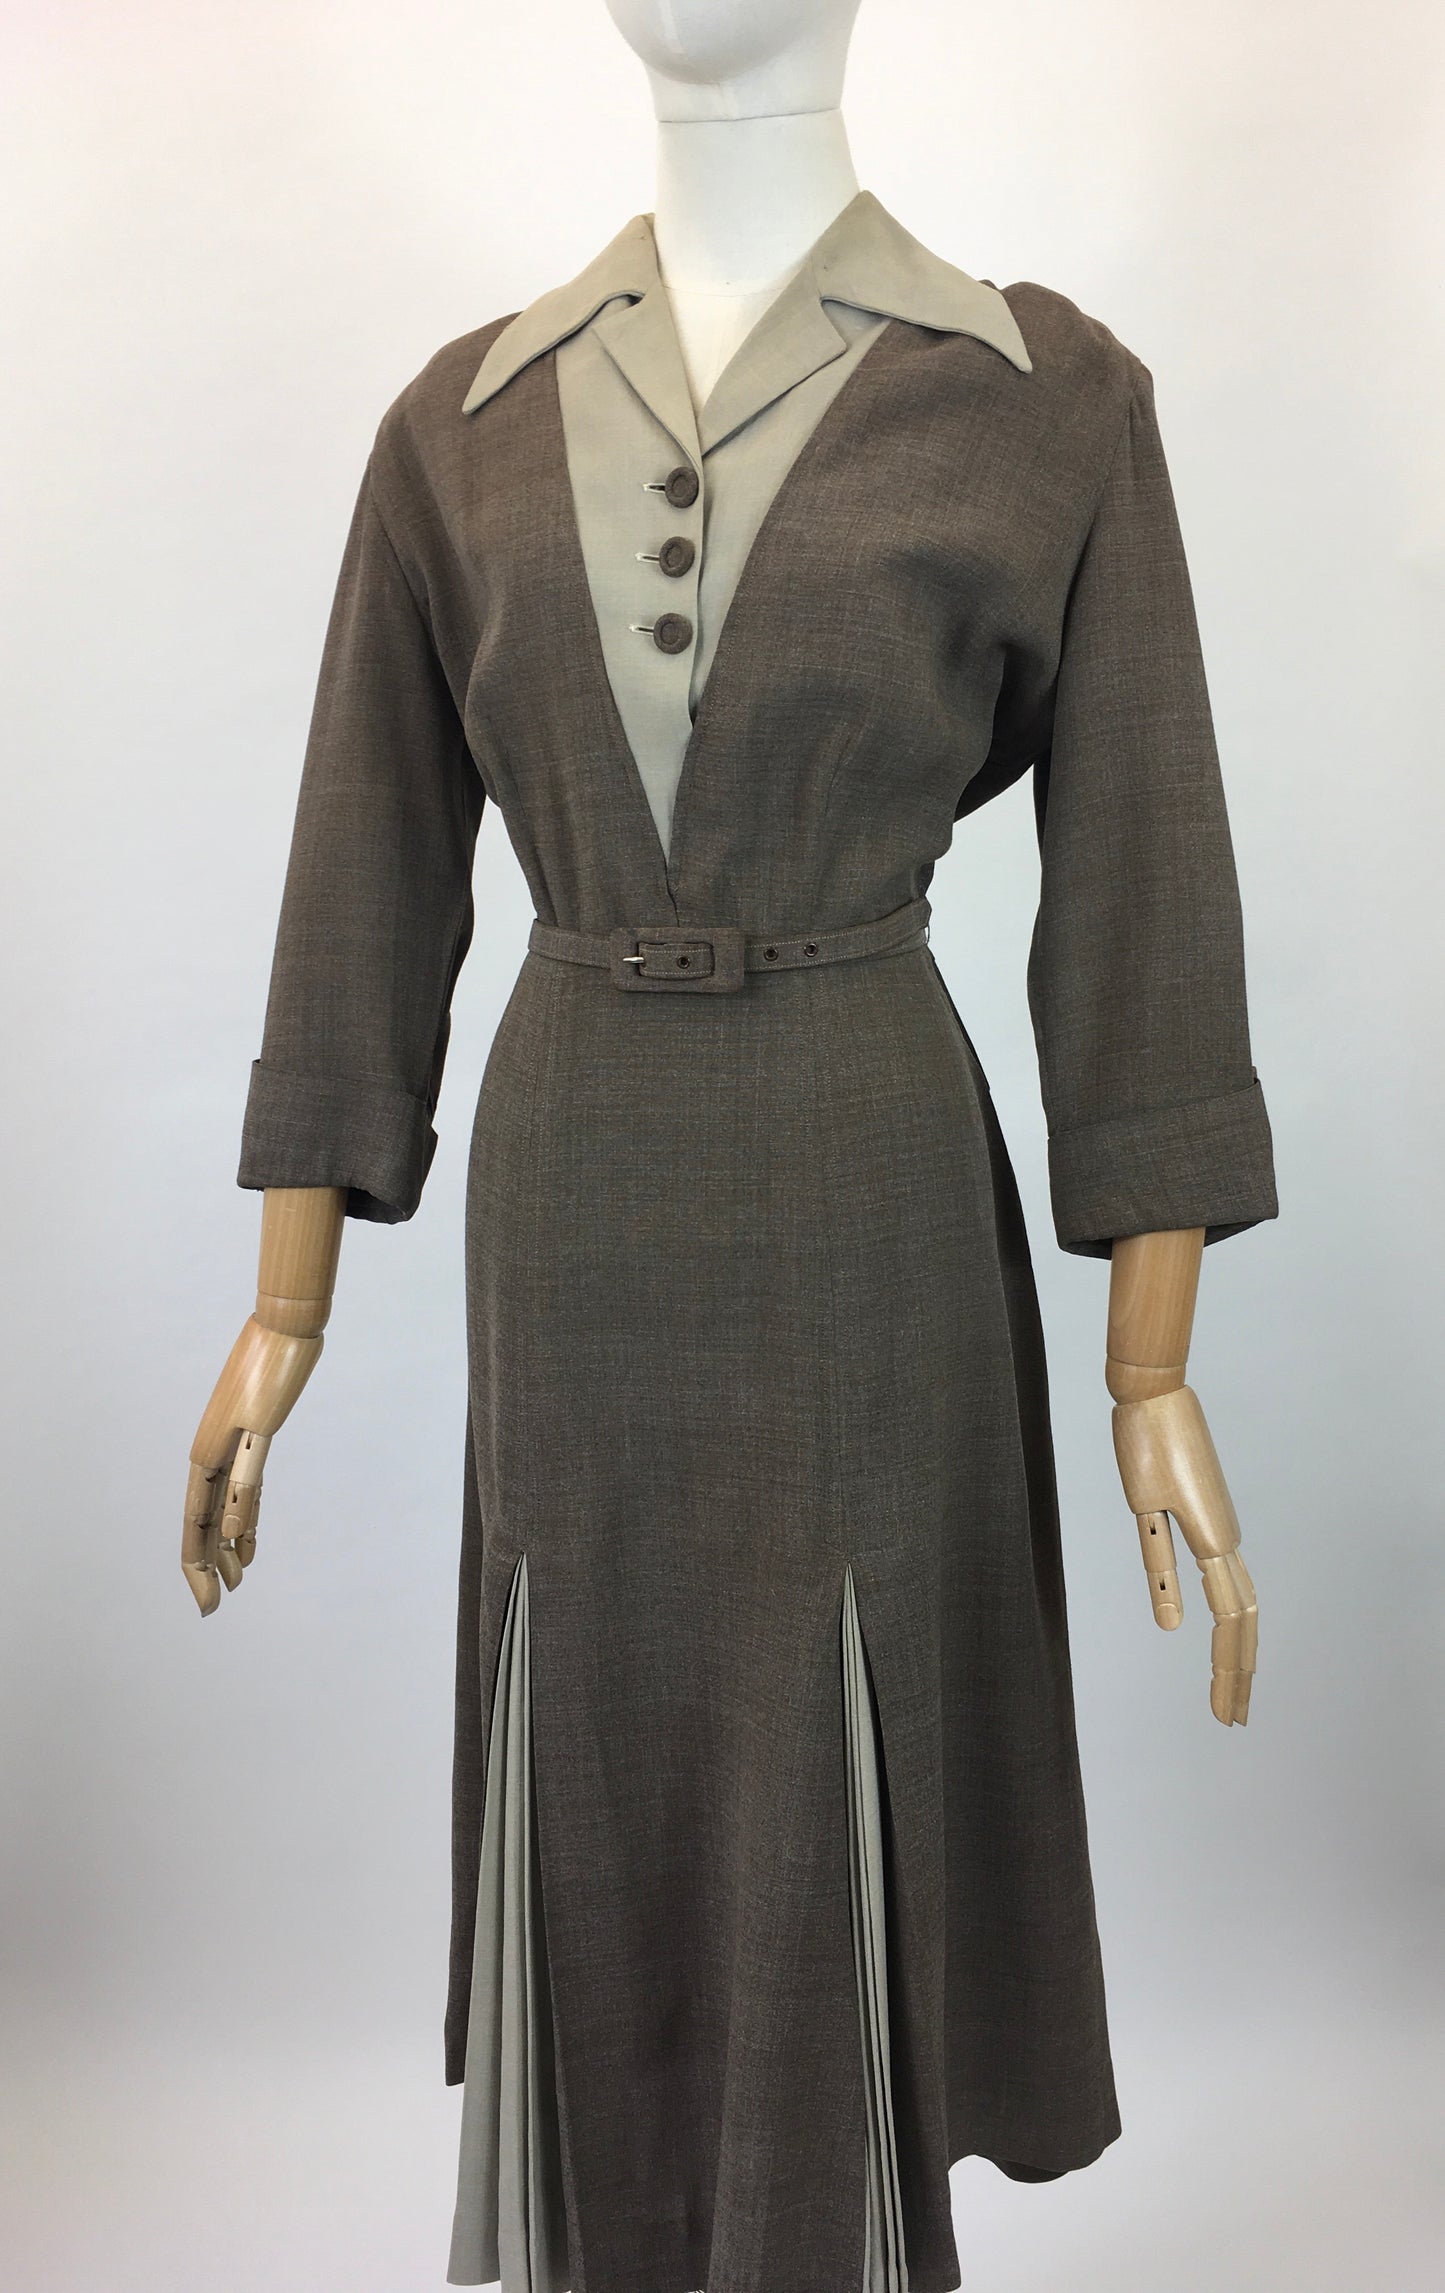 Original 40’s Beautiful Two Tone dress - Taupe and Brown colourway.